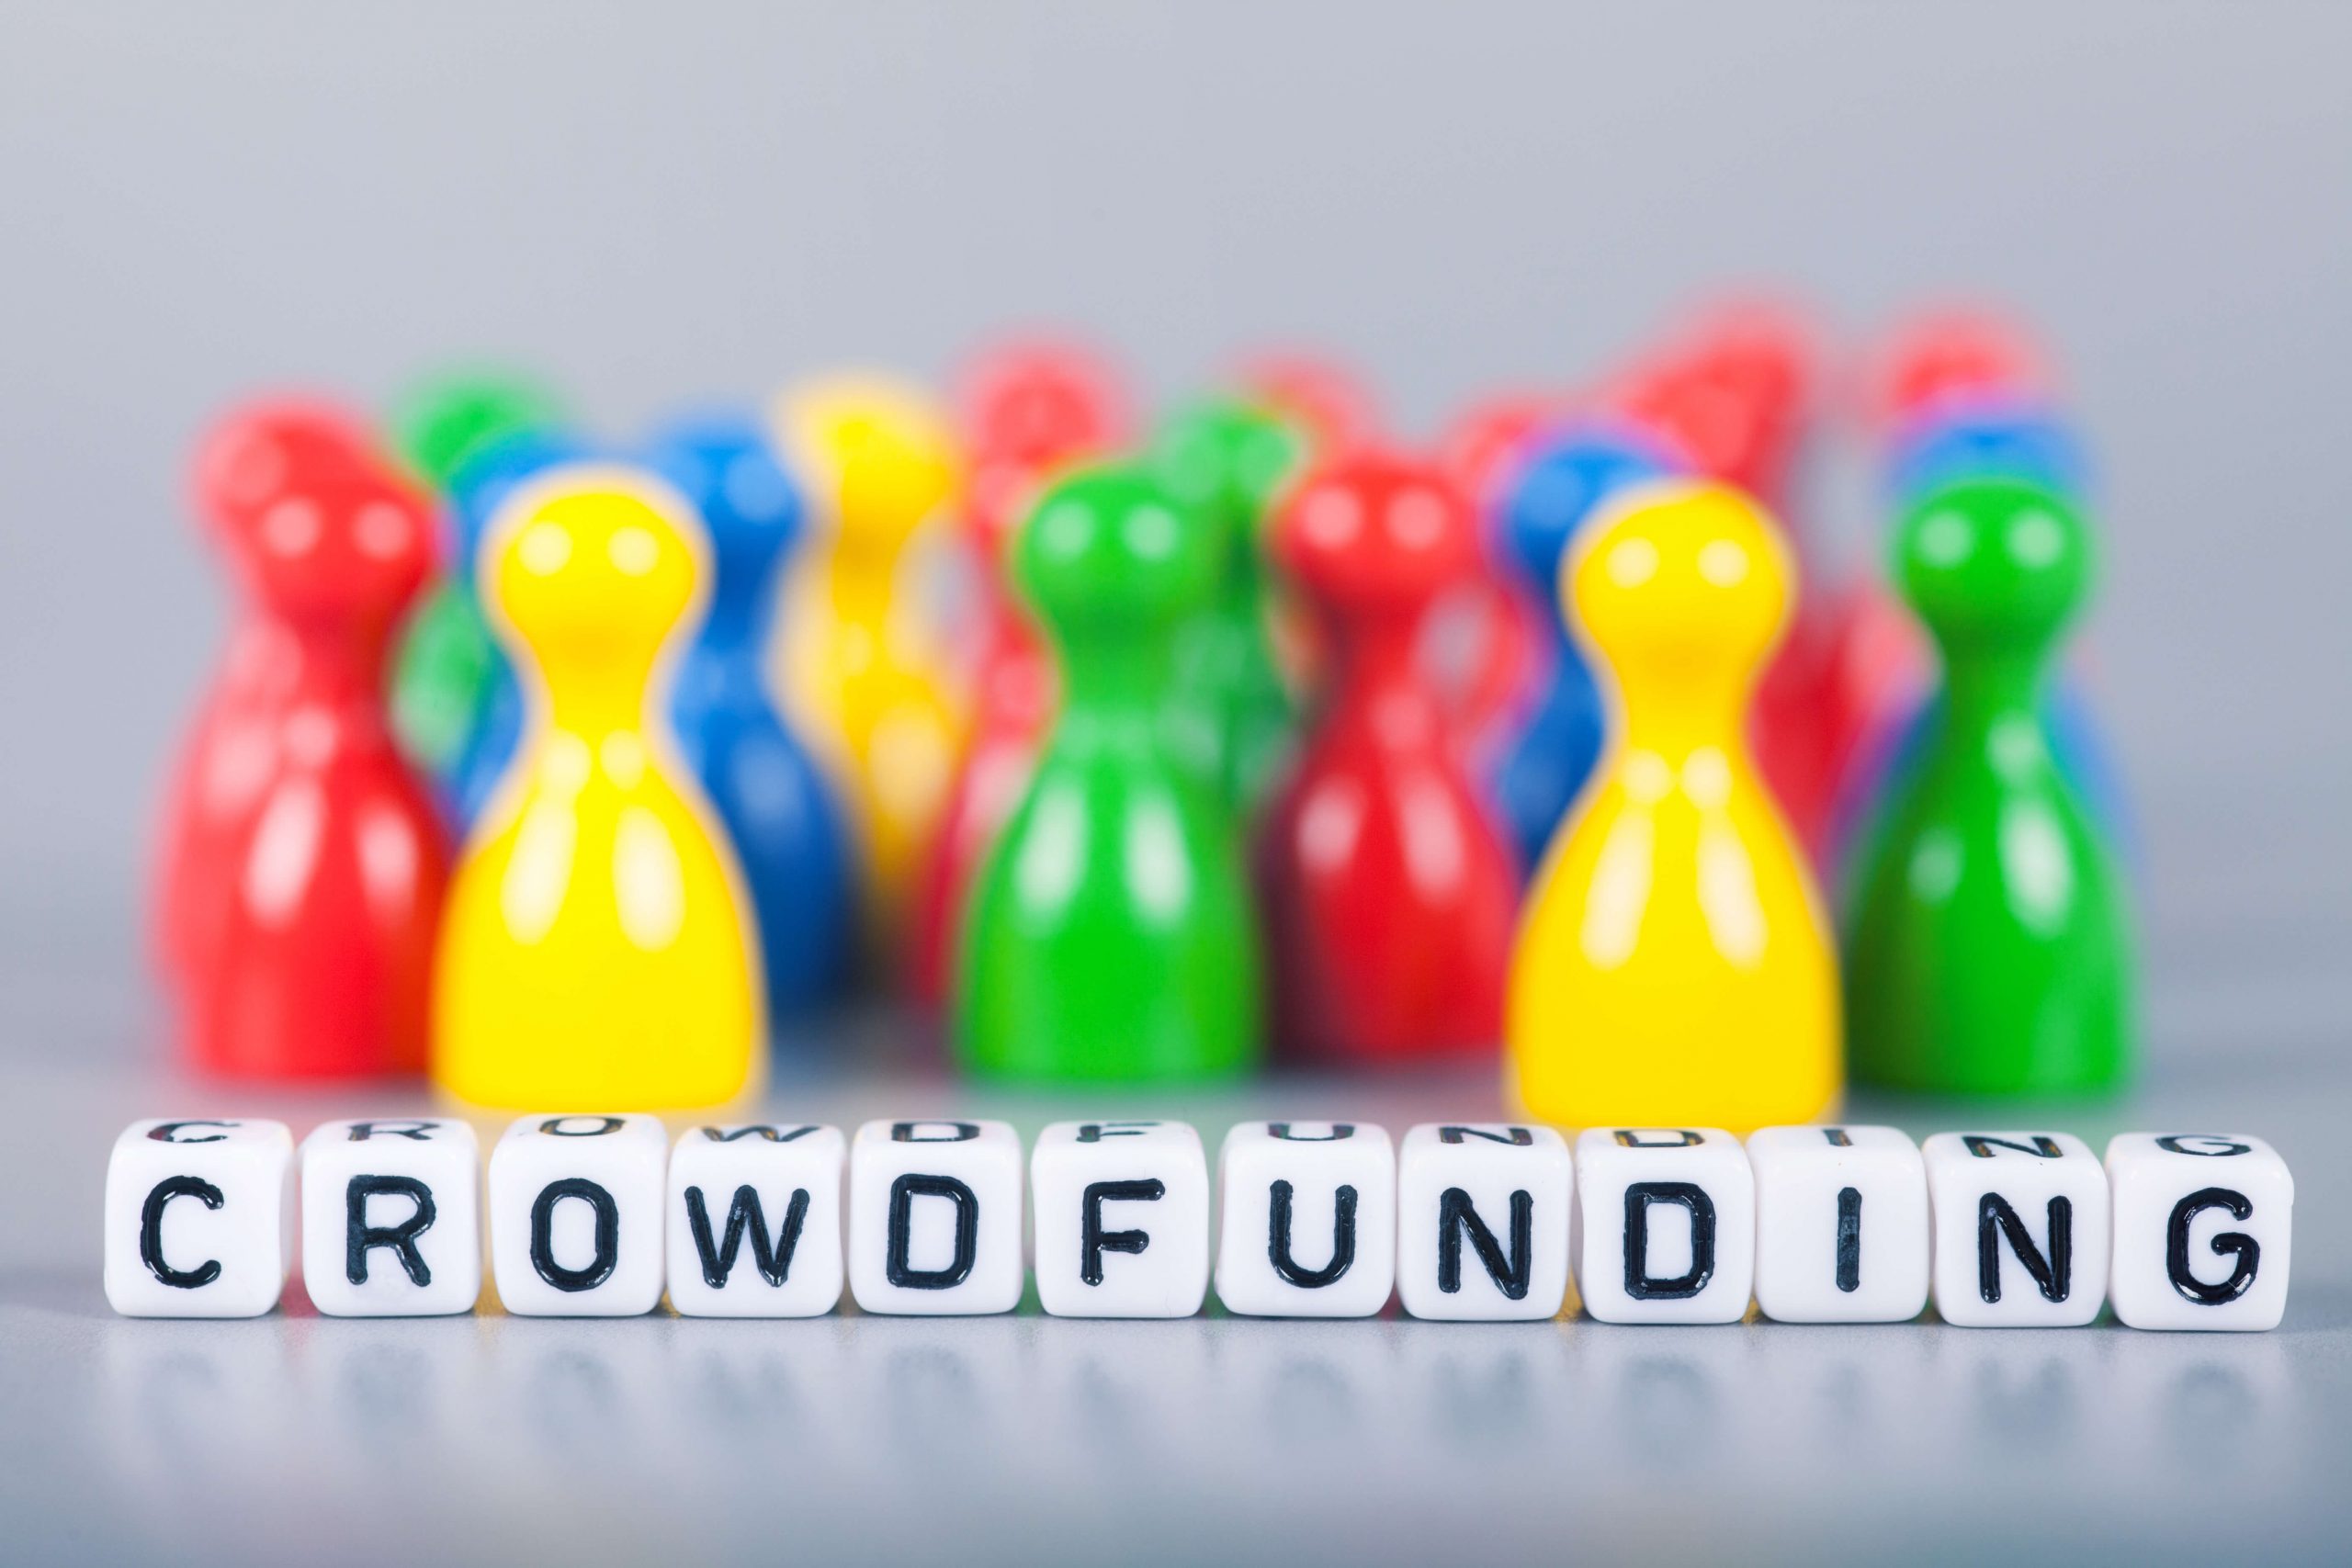 Trending Now: Real Estate Crowdfunding